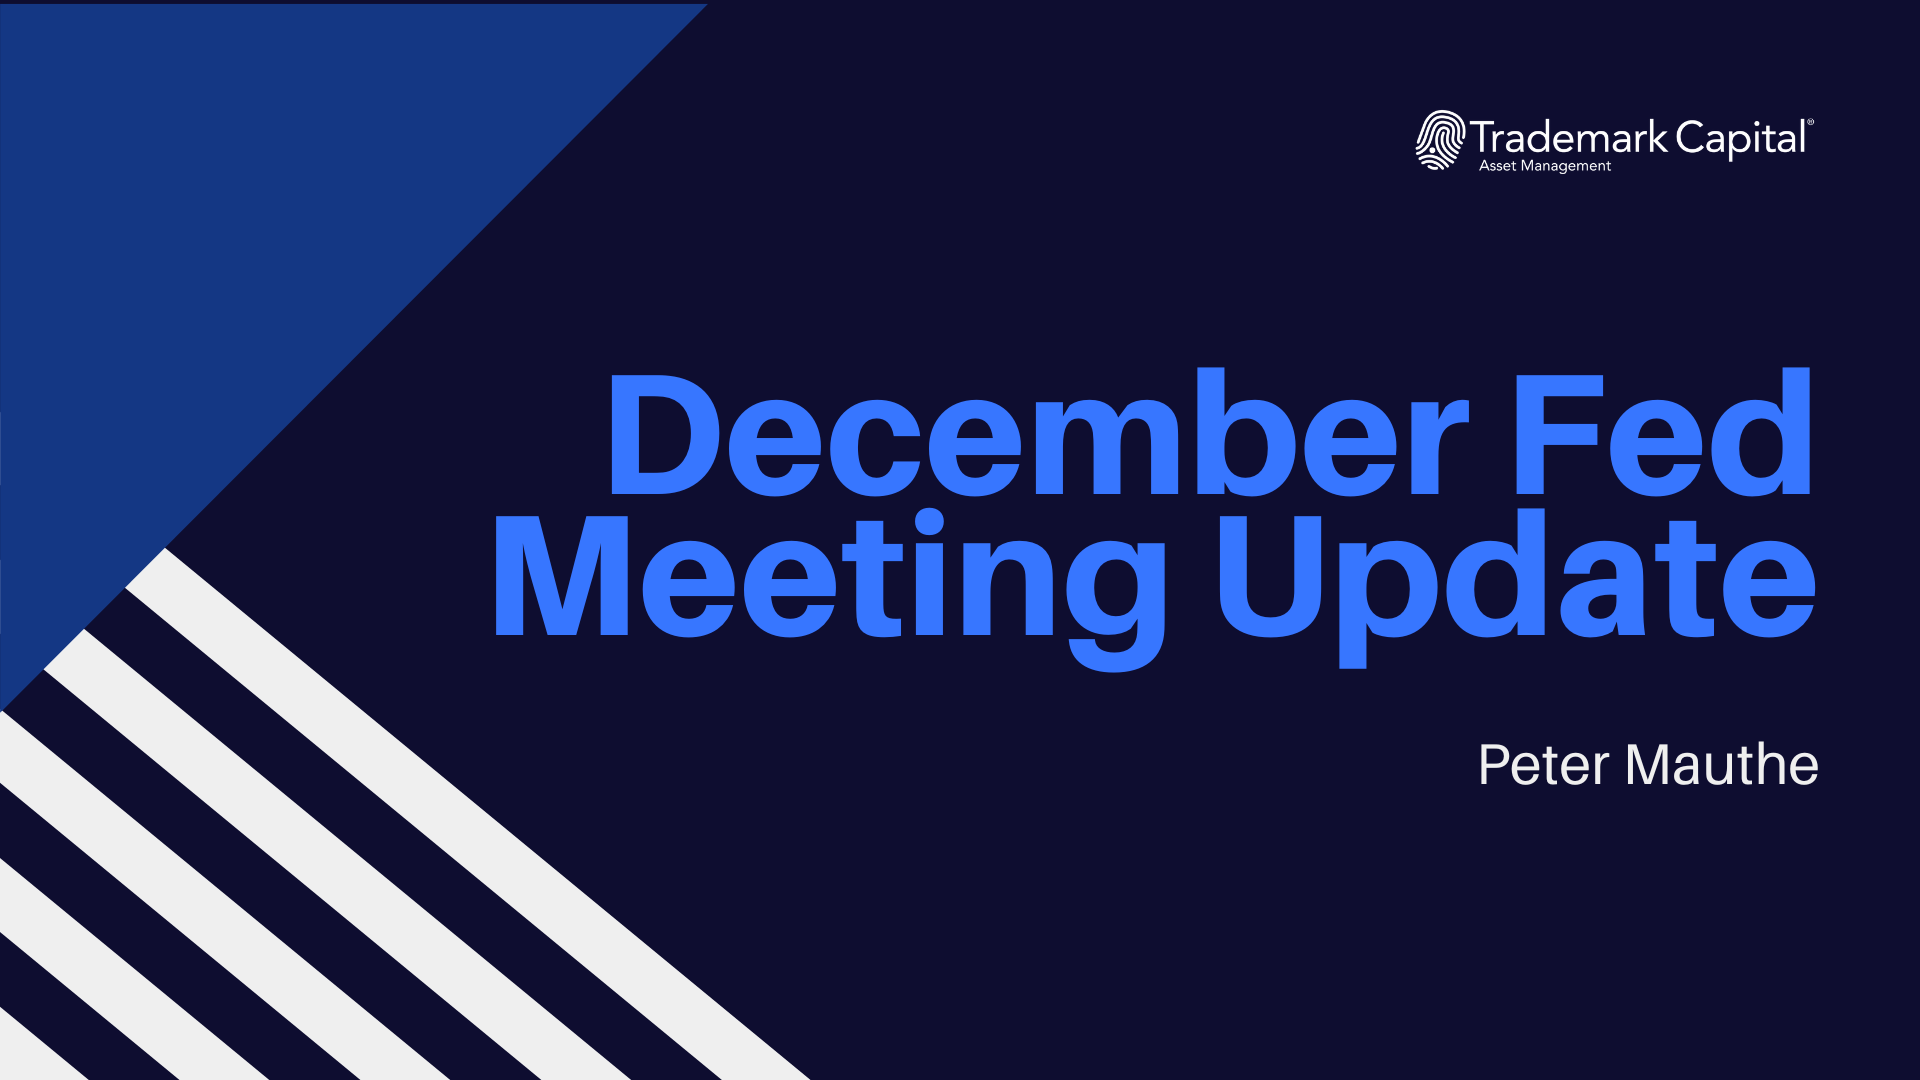 An Update on the Fed’s December Meeting